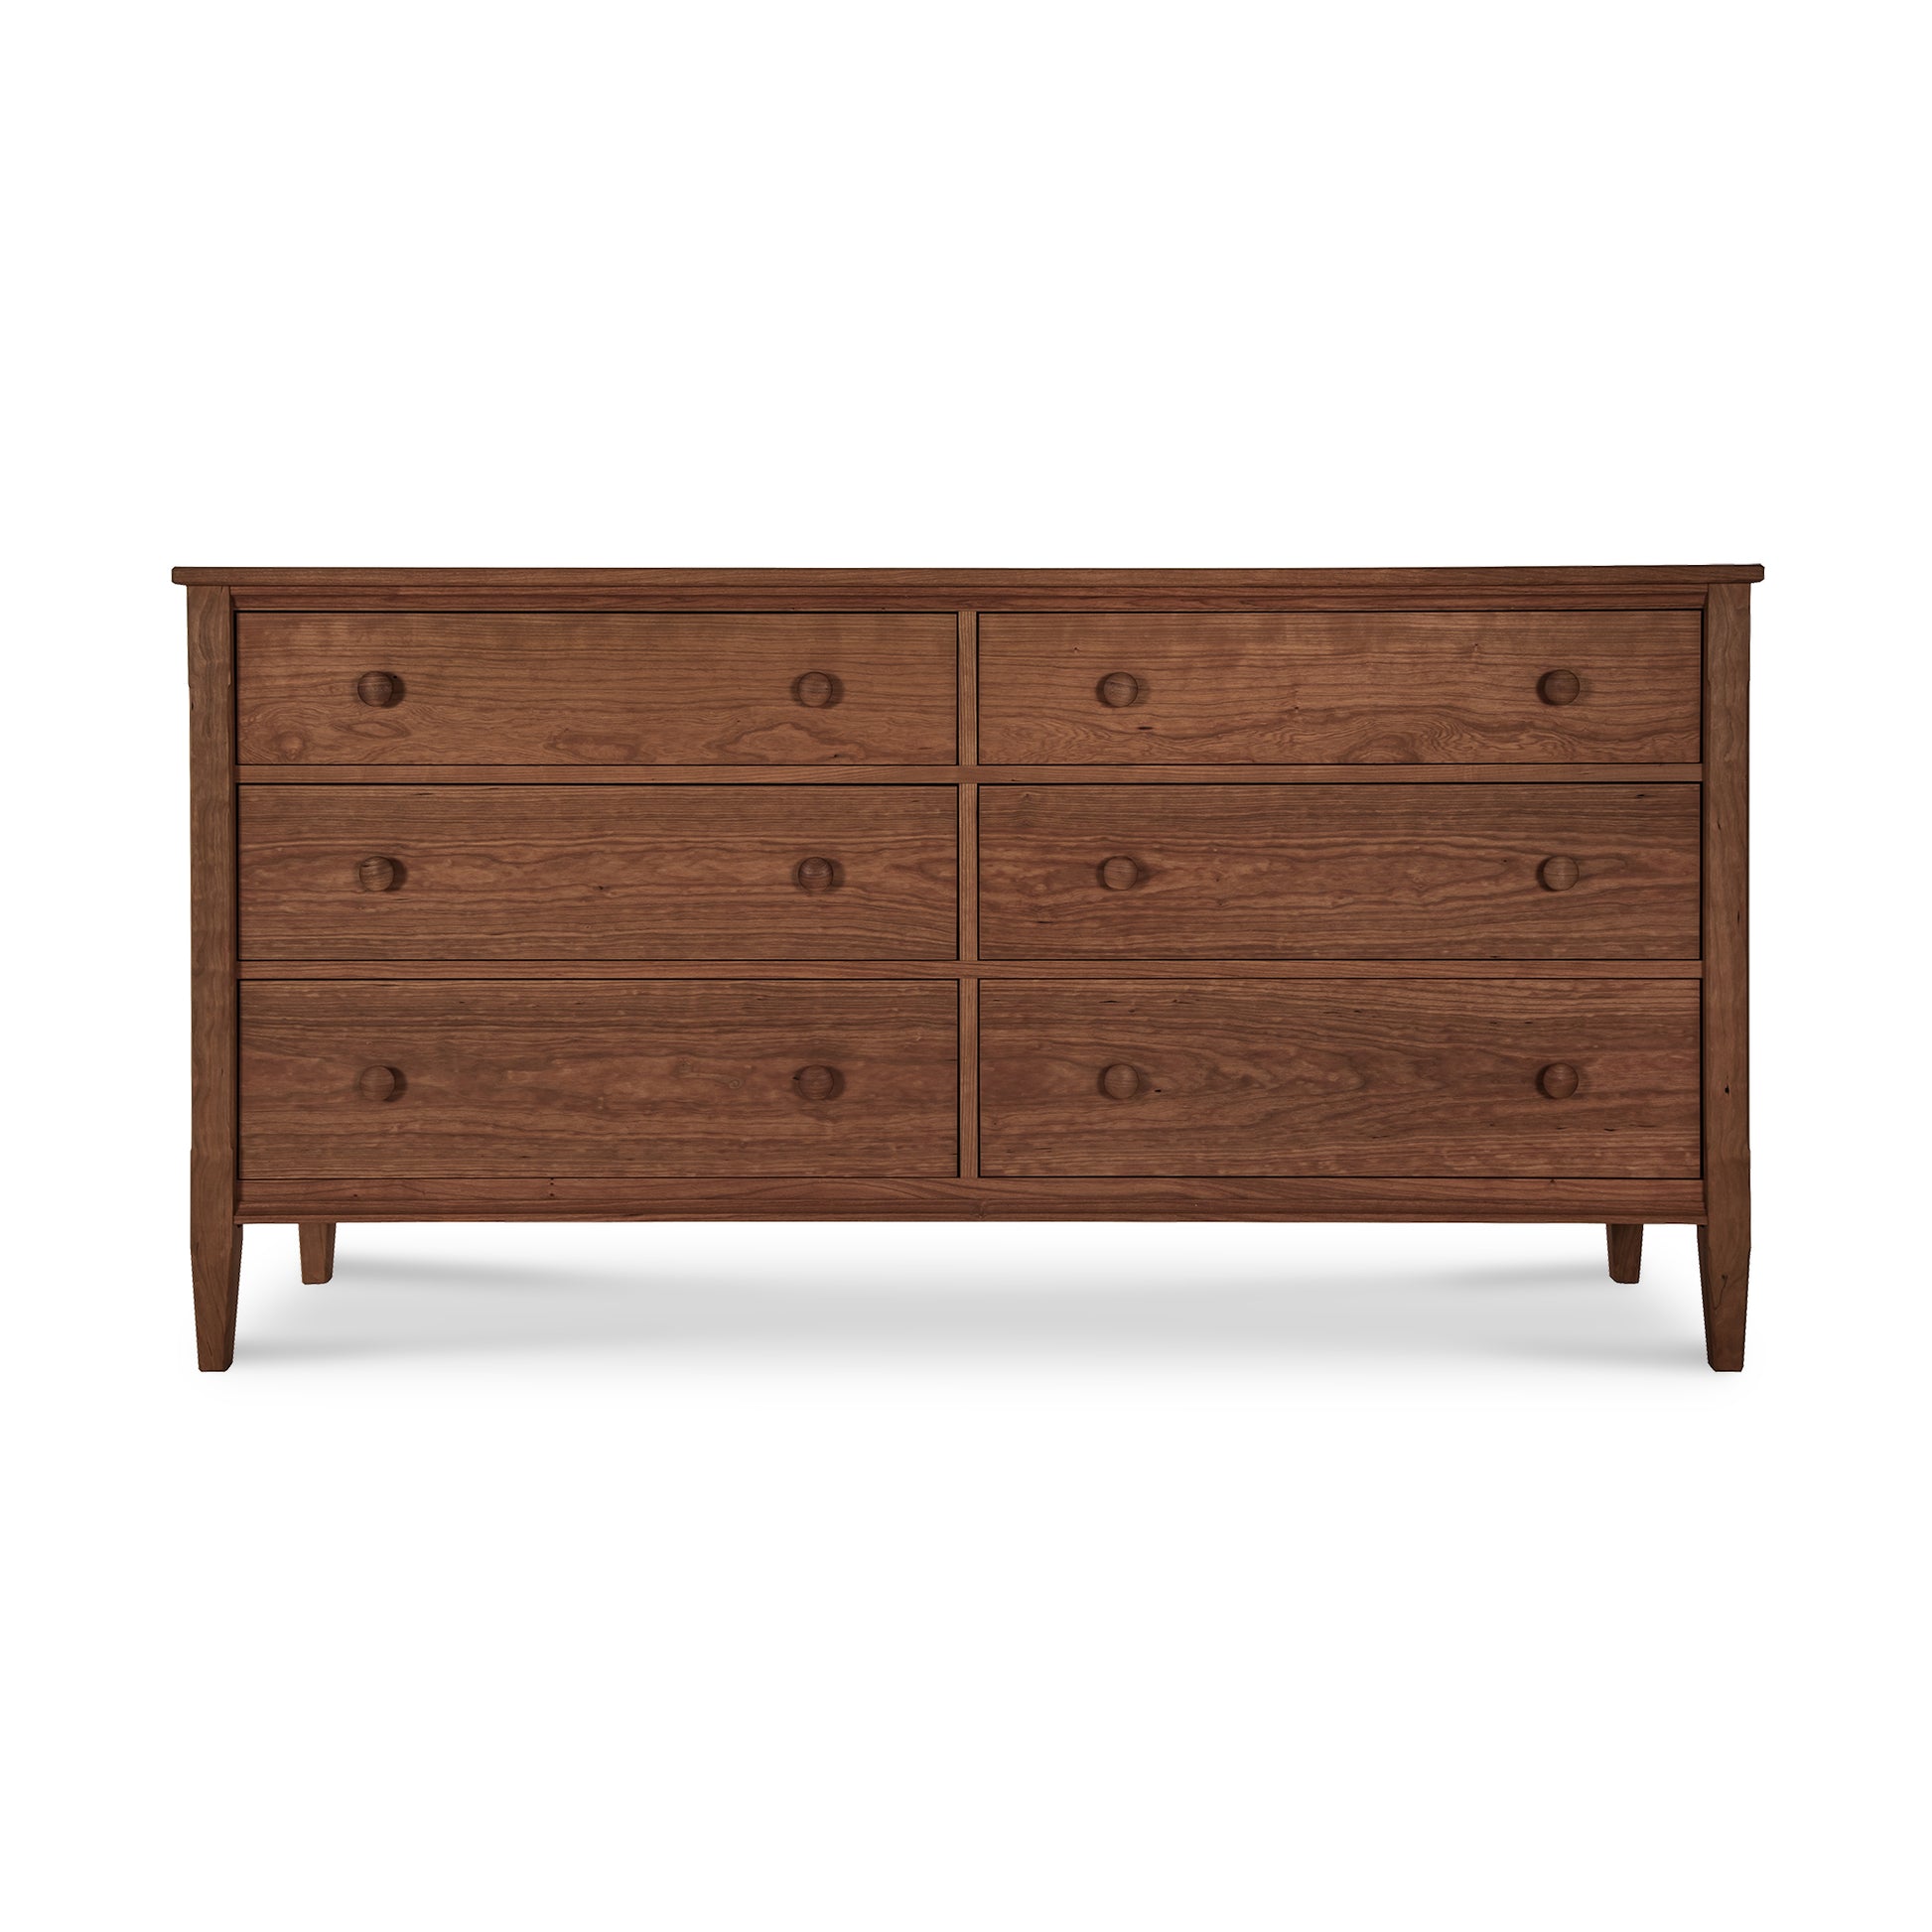 A Vermont Shaker 6-Drawer Dresser from Maple Corner Woodworks, featuring drawers on a white background.